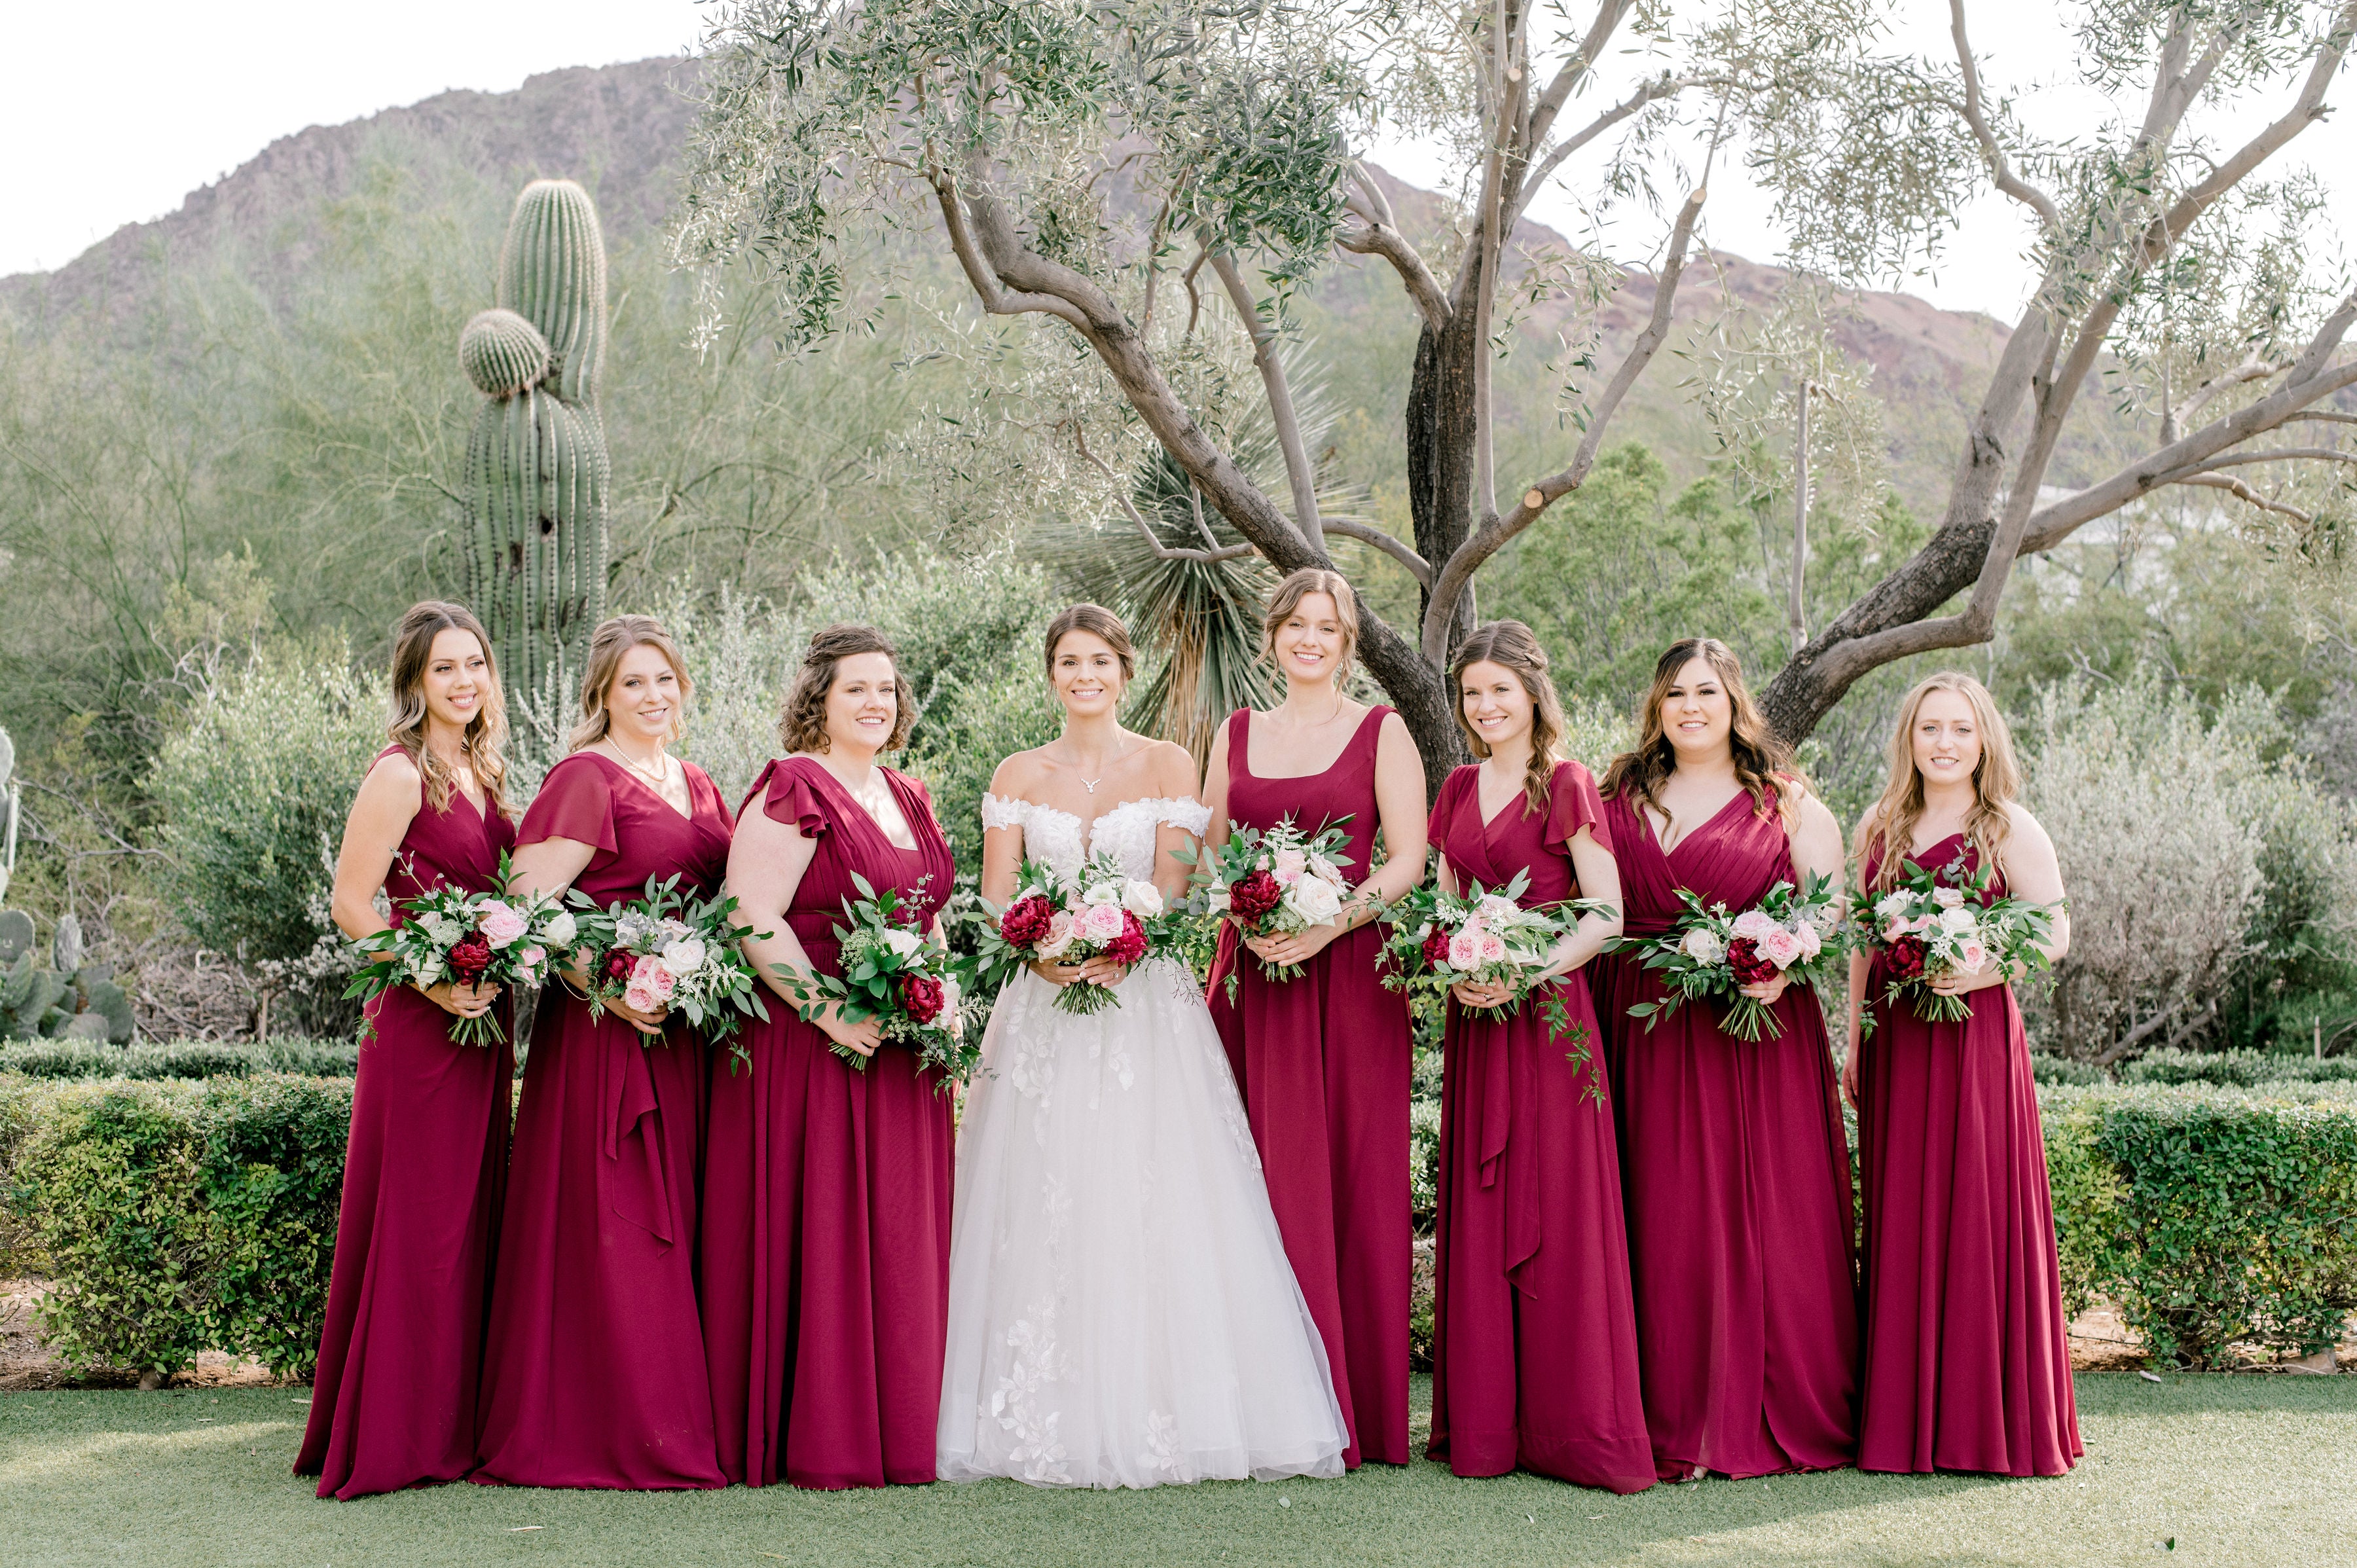 A bride and her bridesmaids pose with their flower bouquets in front of Camelback Moutnain at El Chorro